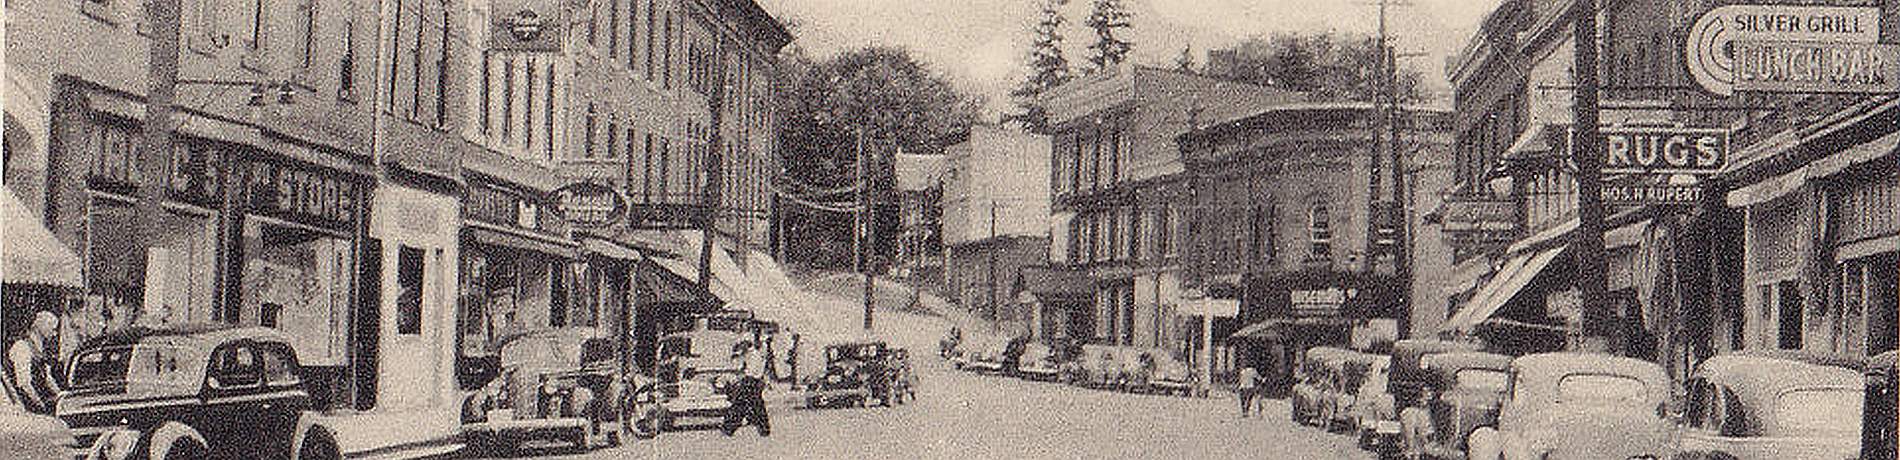 Postcard view of Madoc, Ontario, with 1930s cars parked on the side of the road.